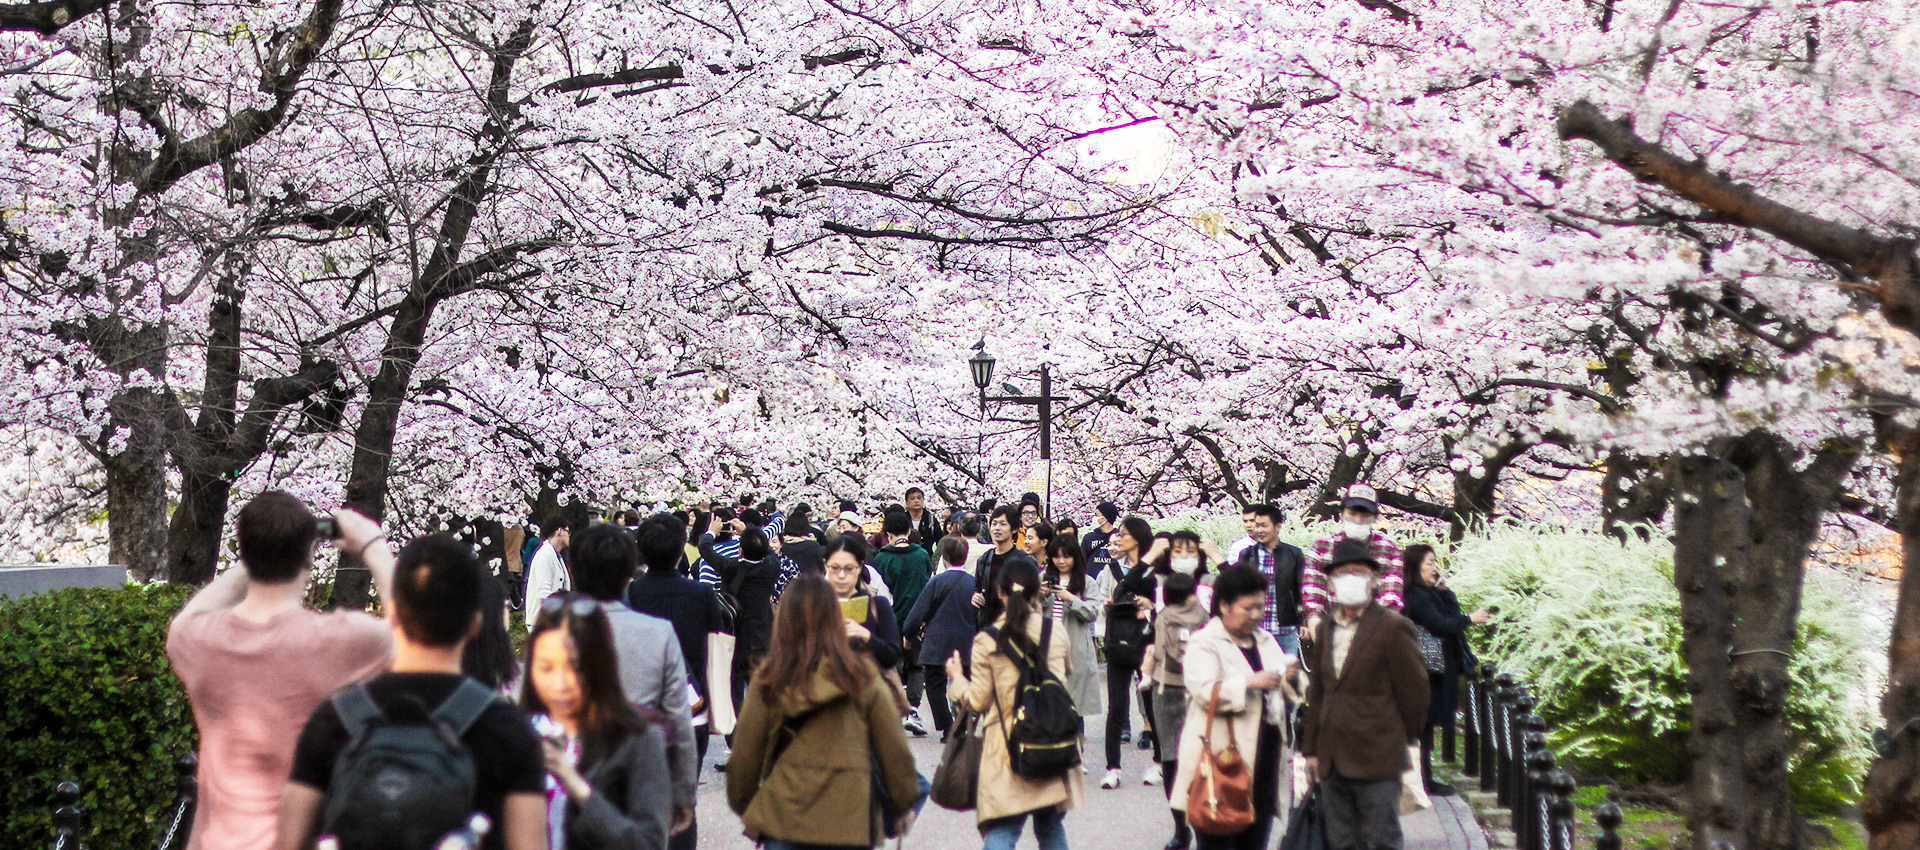 Best Places to see Cherry Blossoms in Tokyo: Ueno Park - Japan Journeys